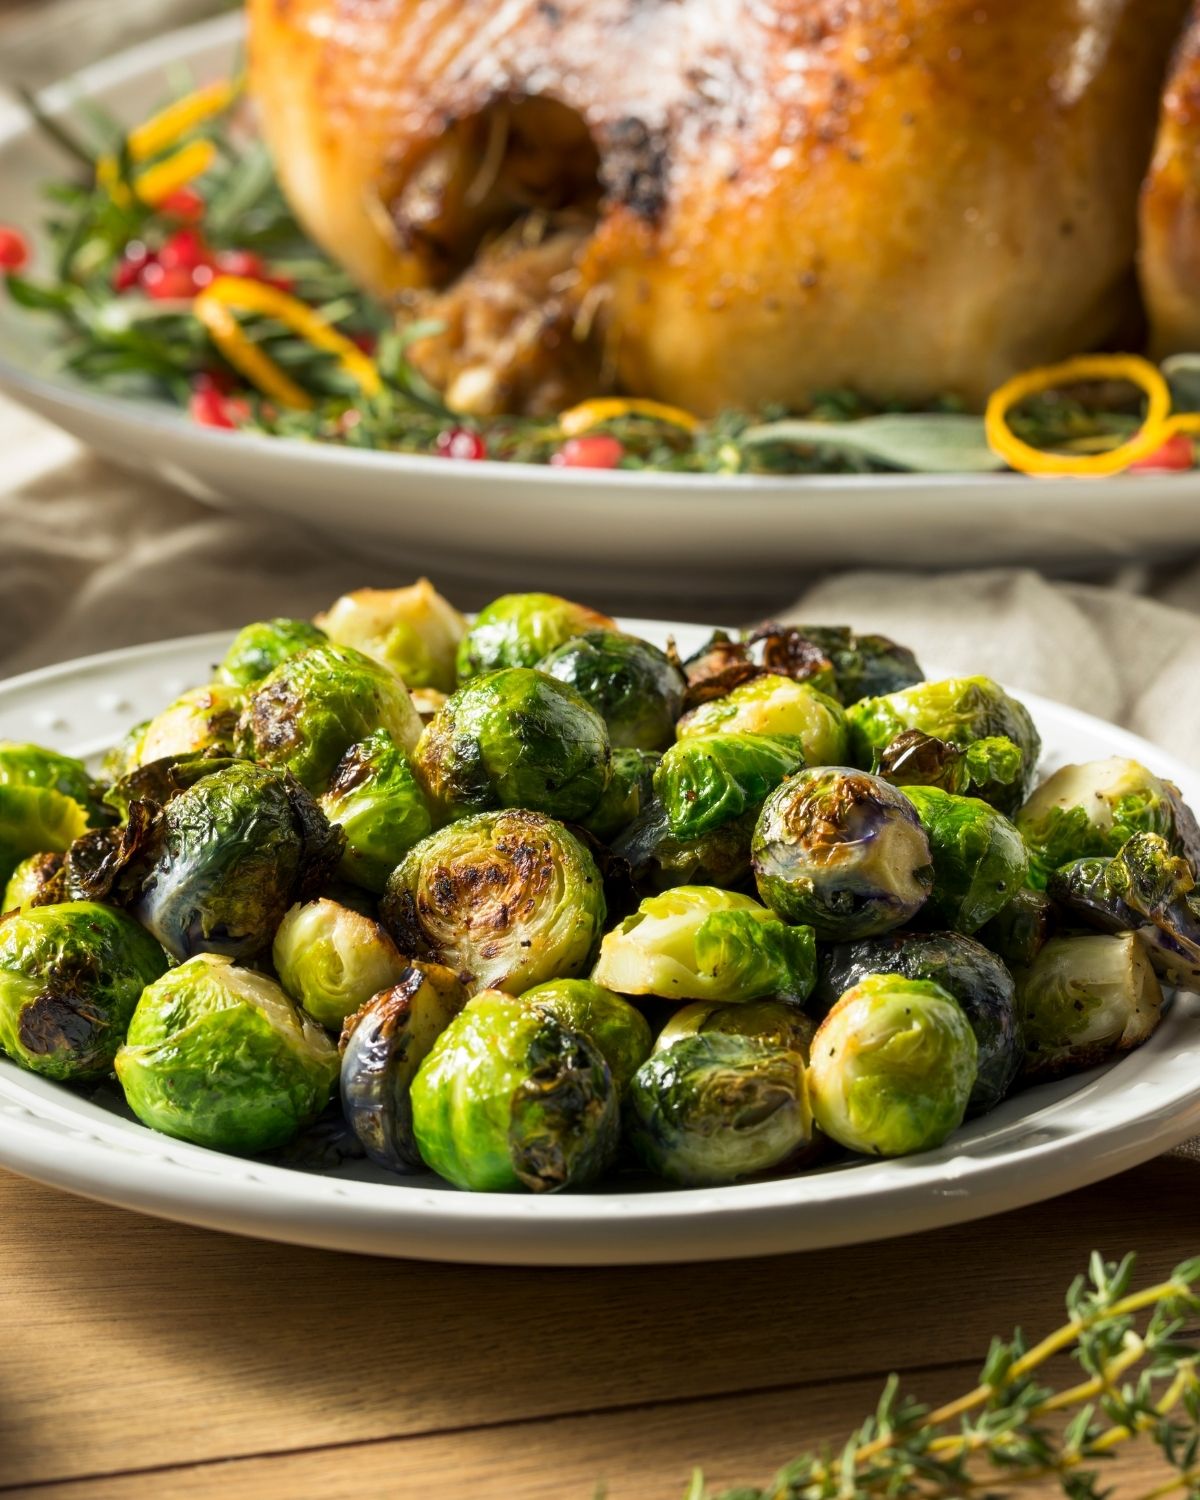 Garlic Parmesan Brussel Sprouts  on a table with dinner items.